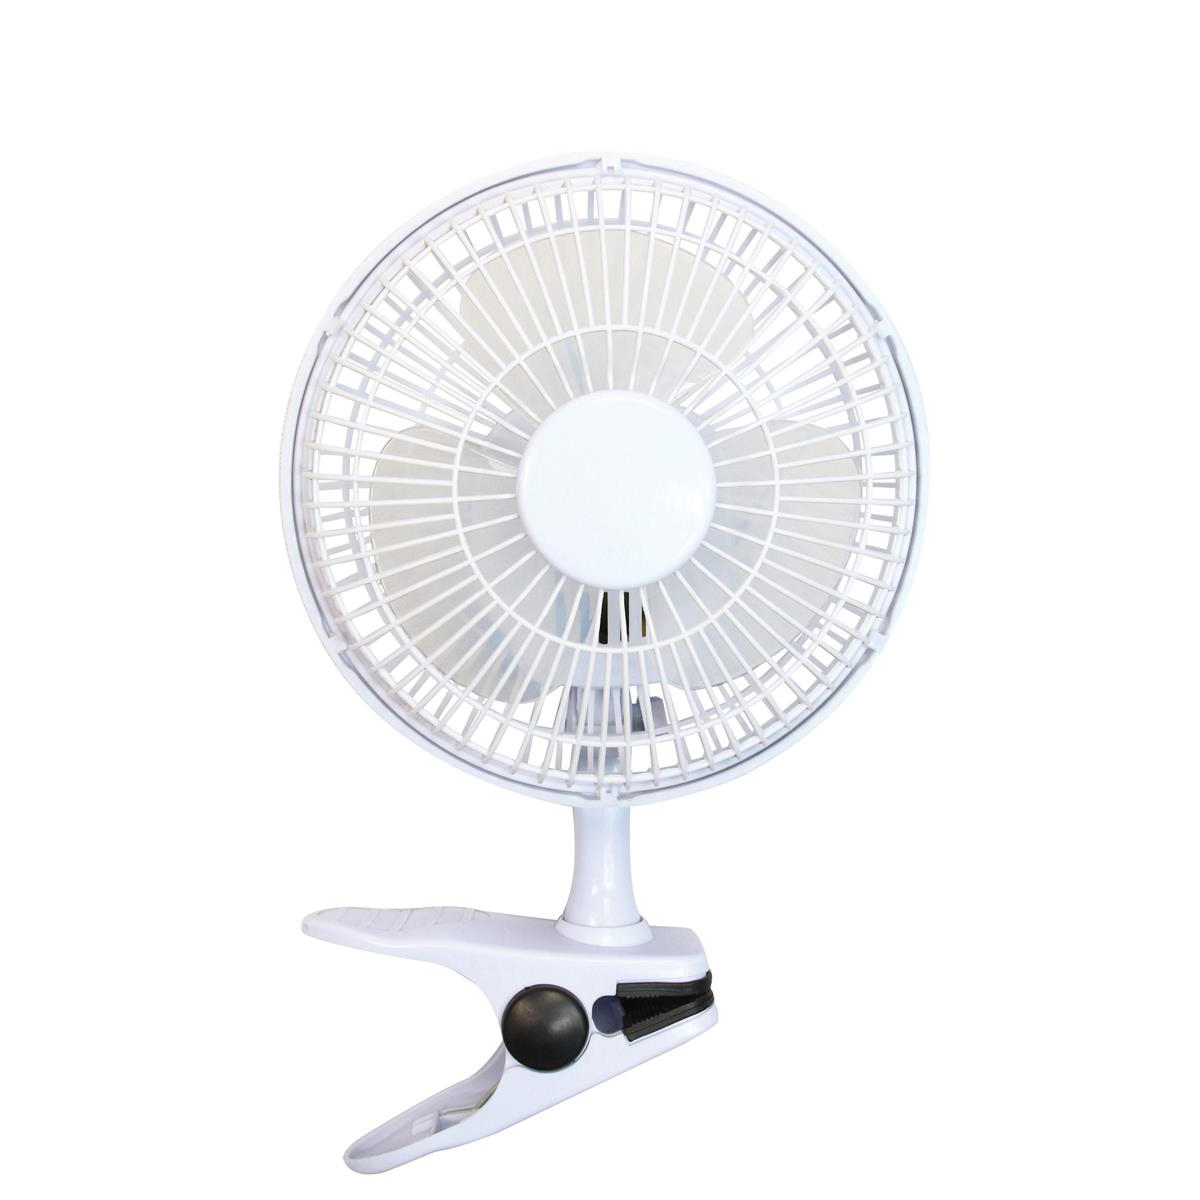 5 Star facilities 5 Star Fcl Clip-on Fan 6inch White